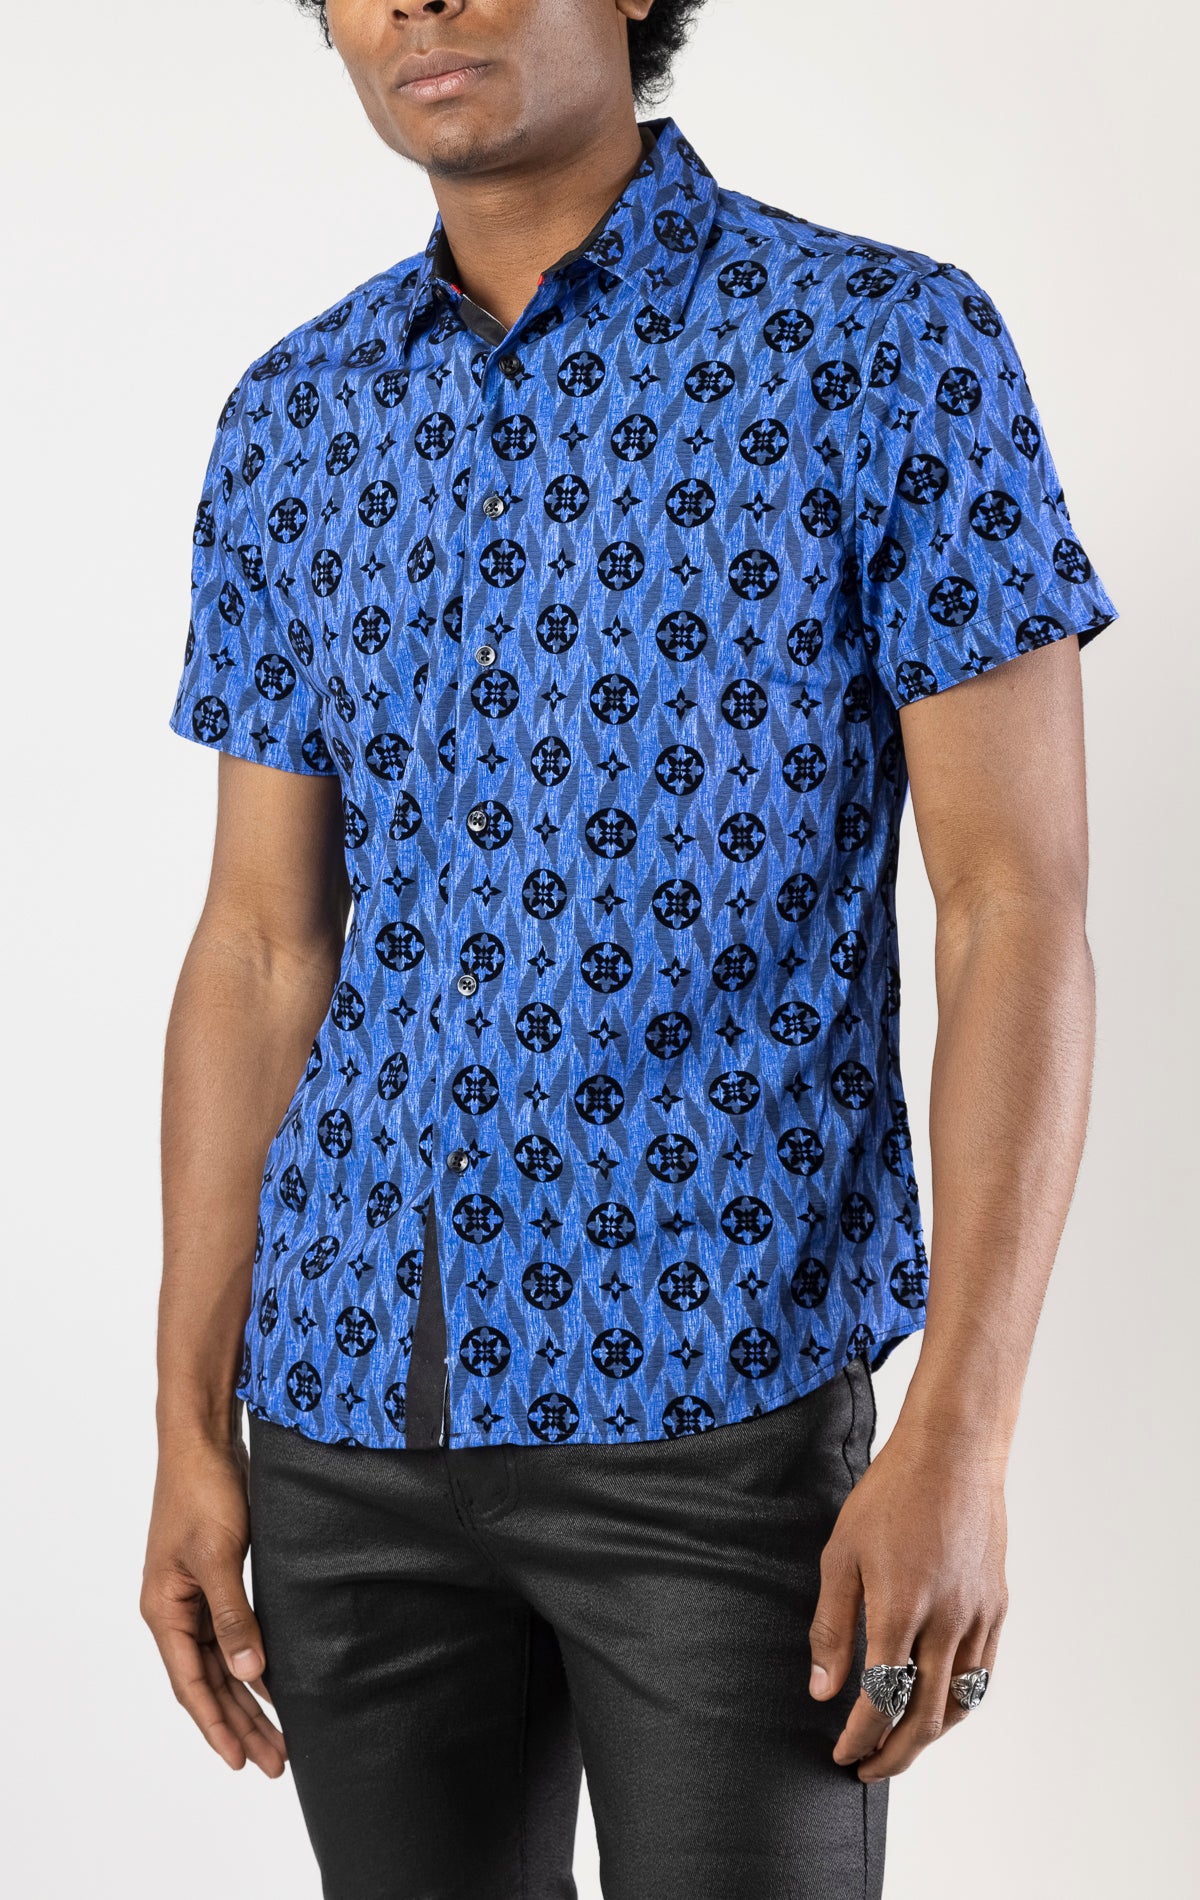 Blue Men's casual, relaxed-fit button-down shirt with a short sleeve design. The shirt features an all-over Greek key pattern and a front button closure.